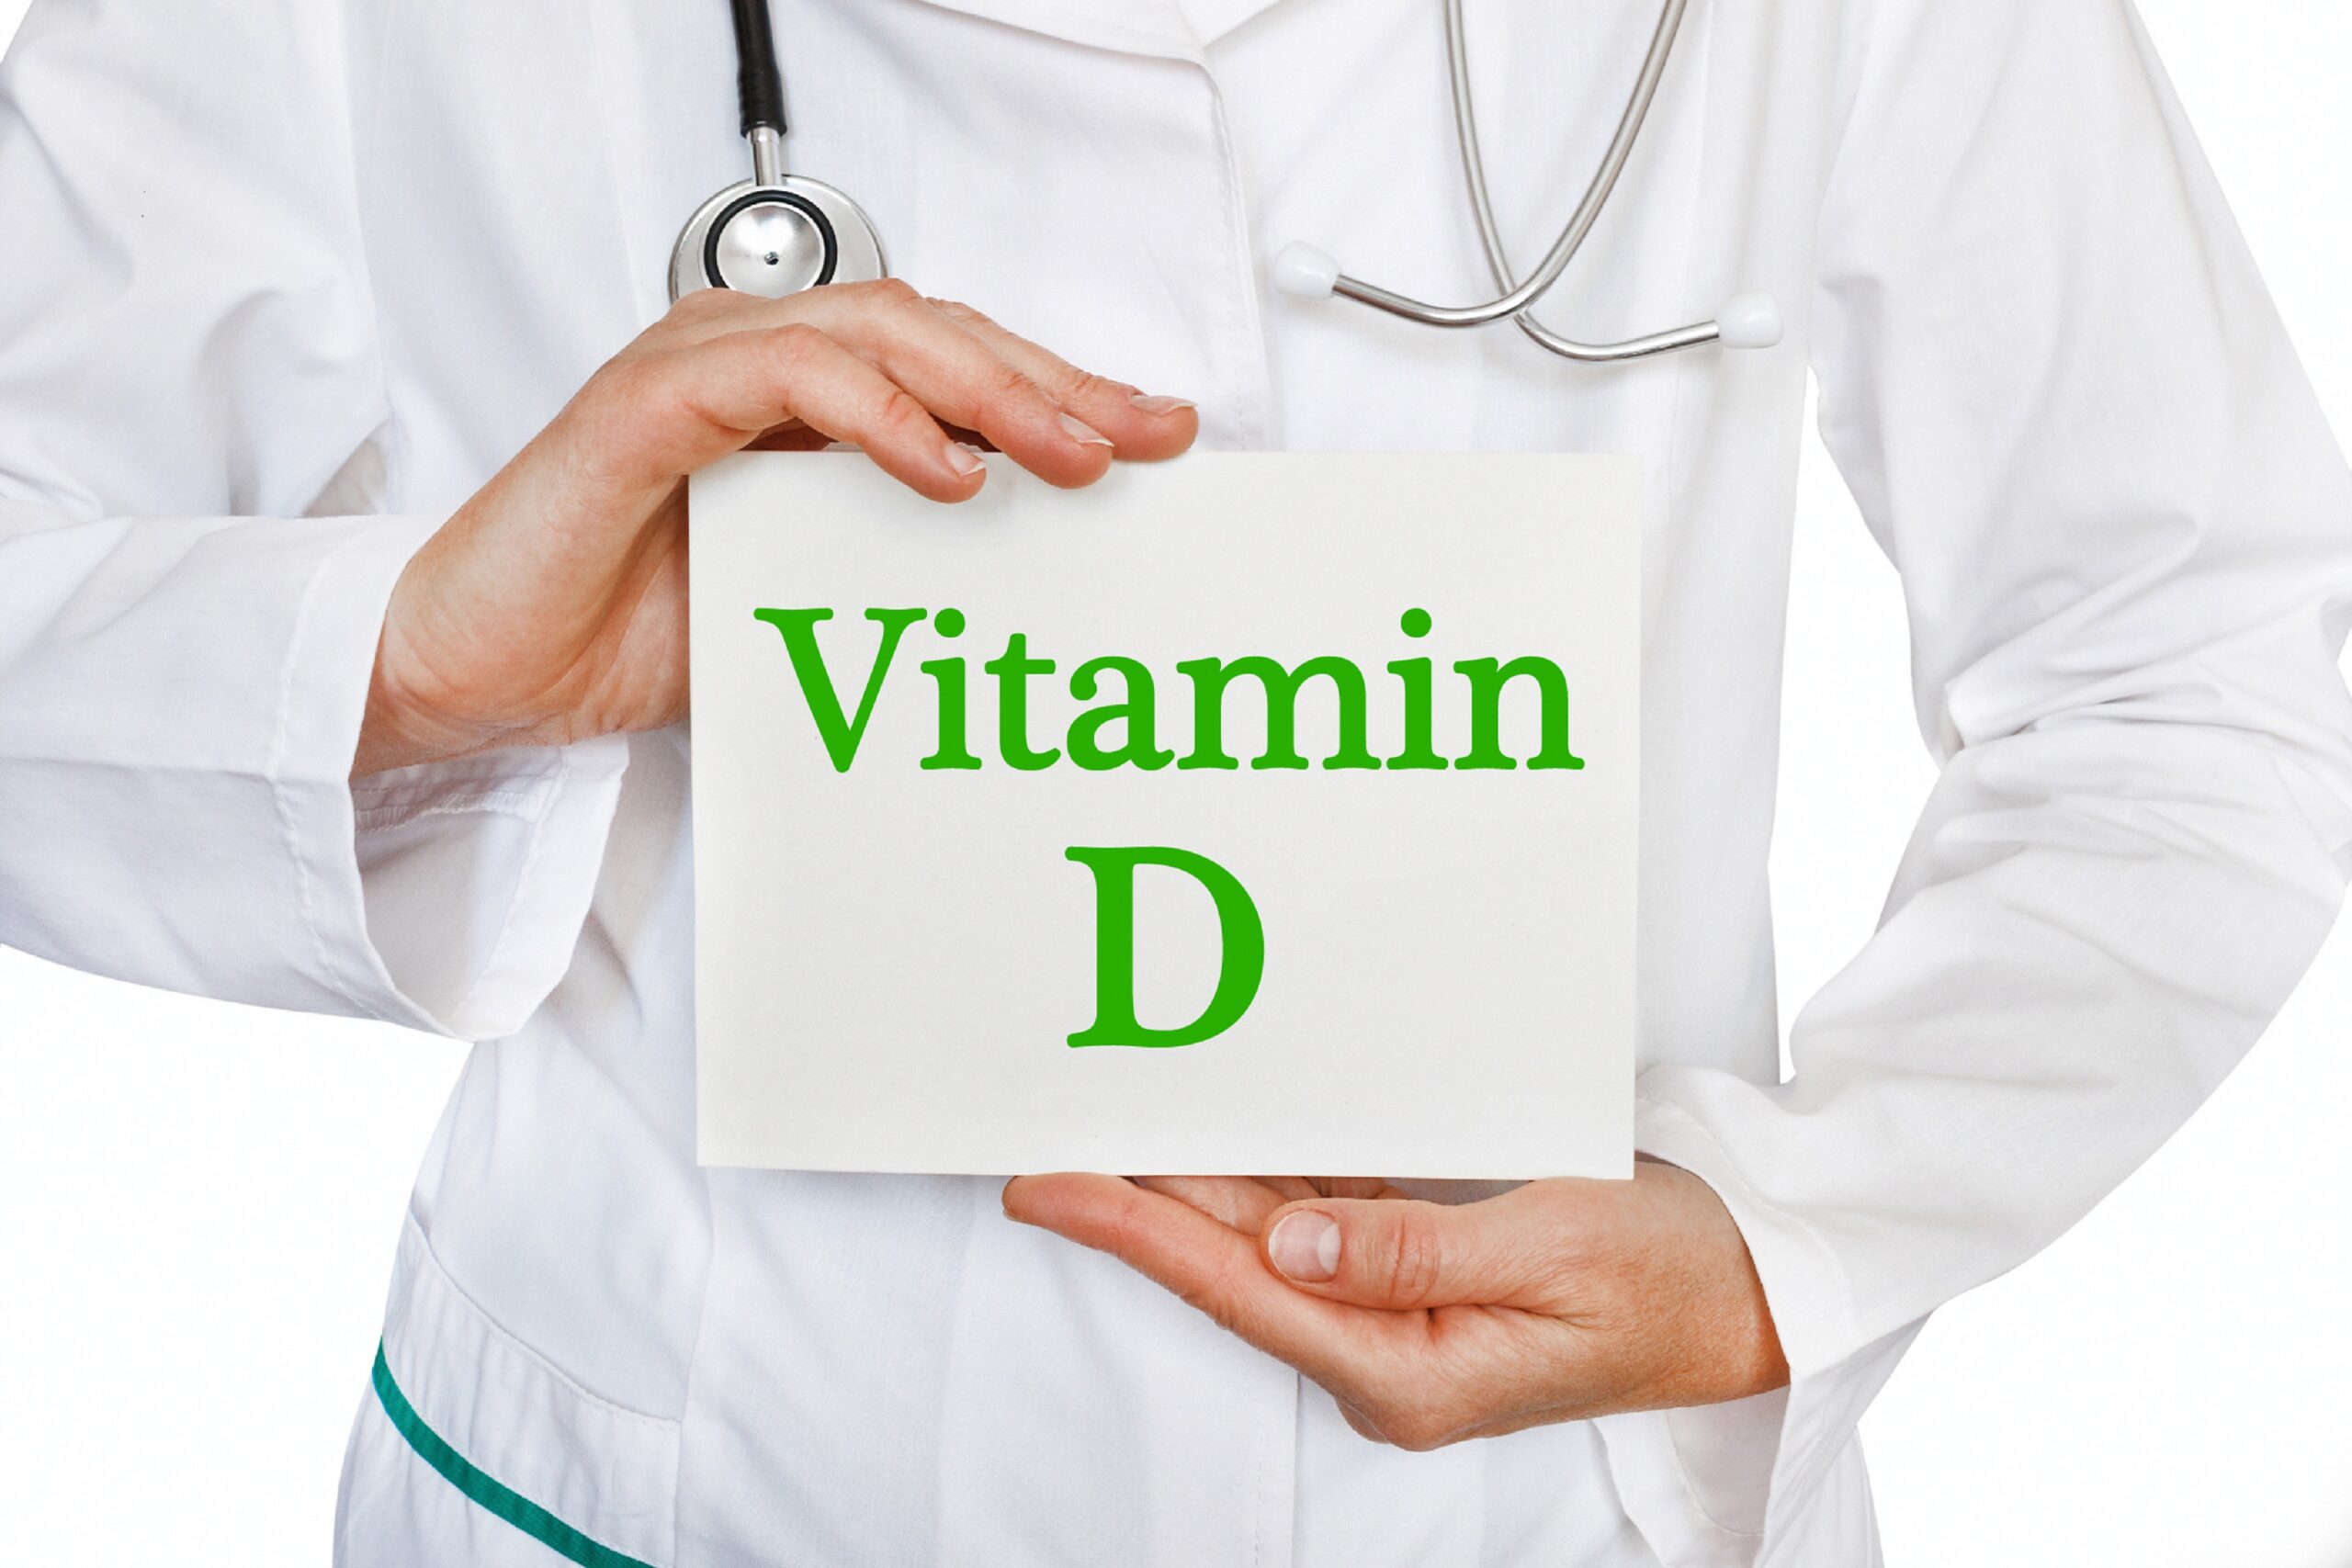 Vitamin D supplements to reduce cardiovascular risk?